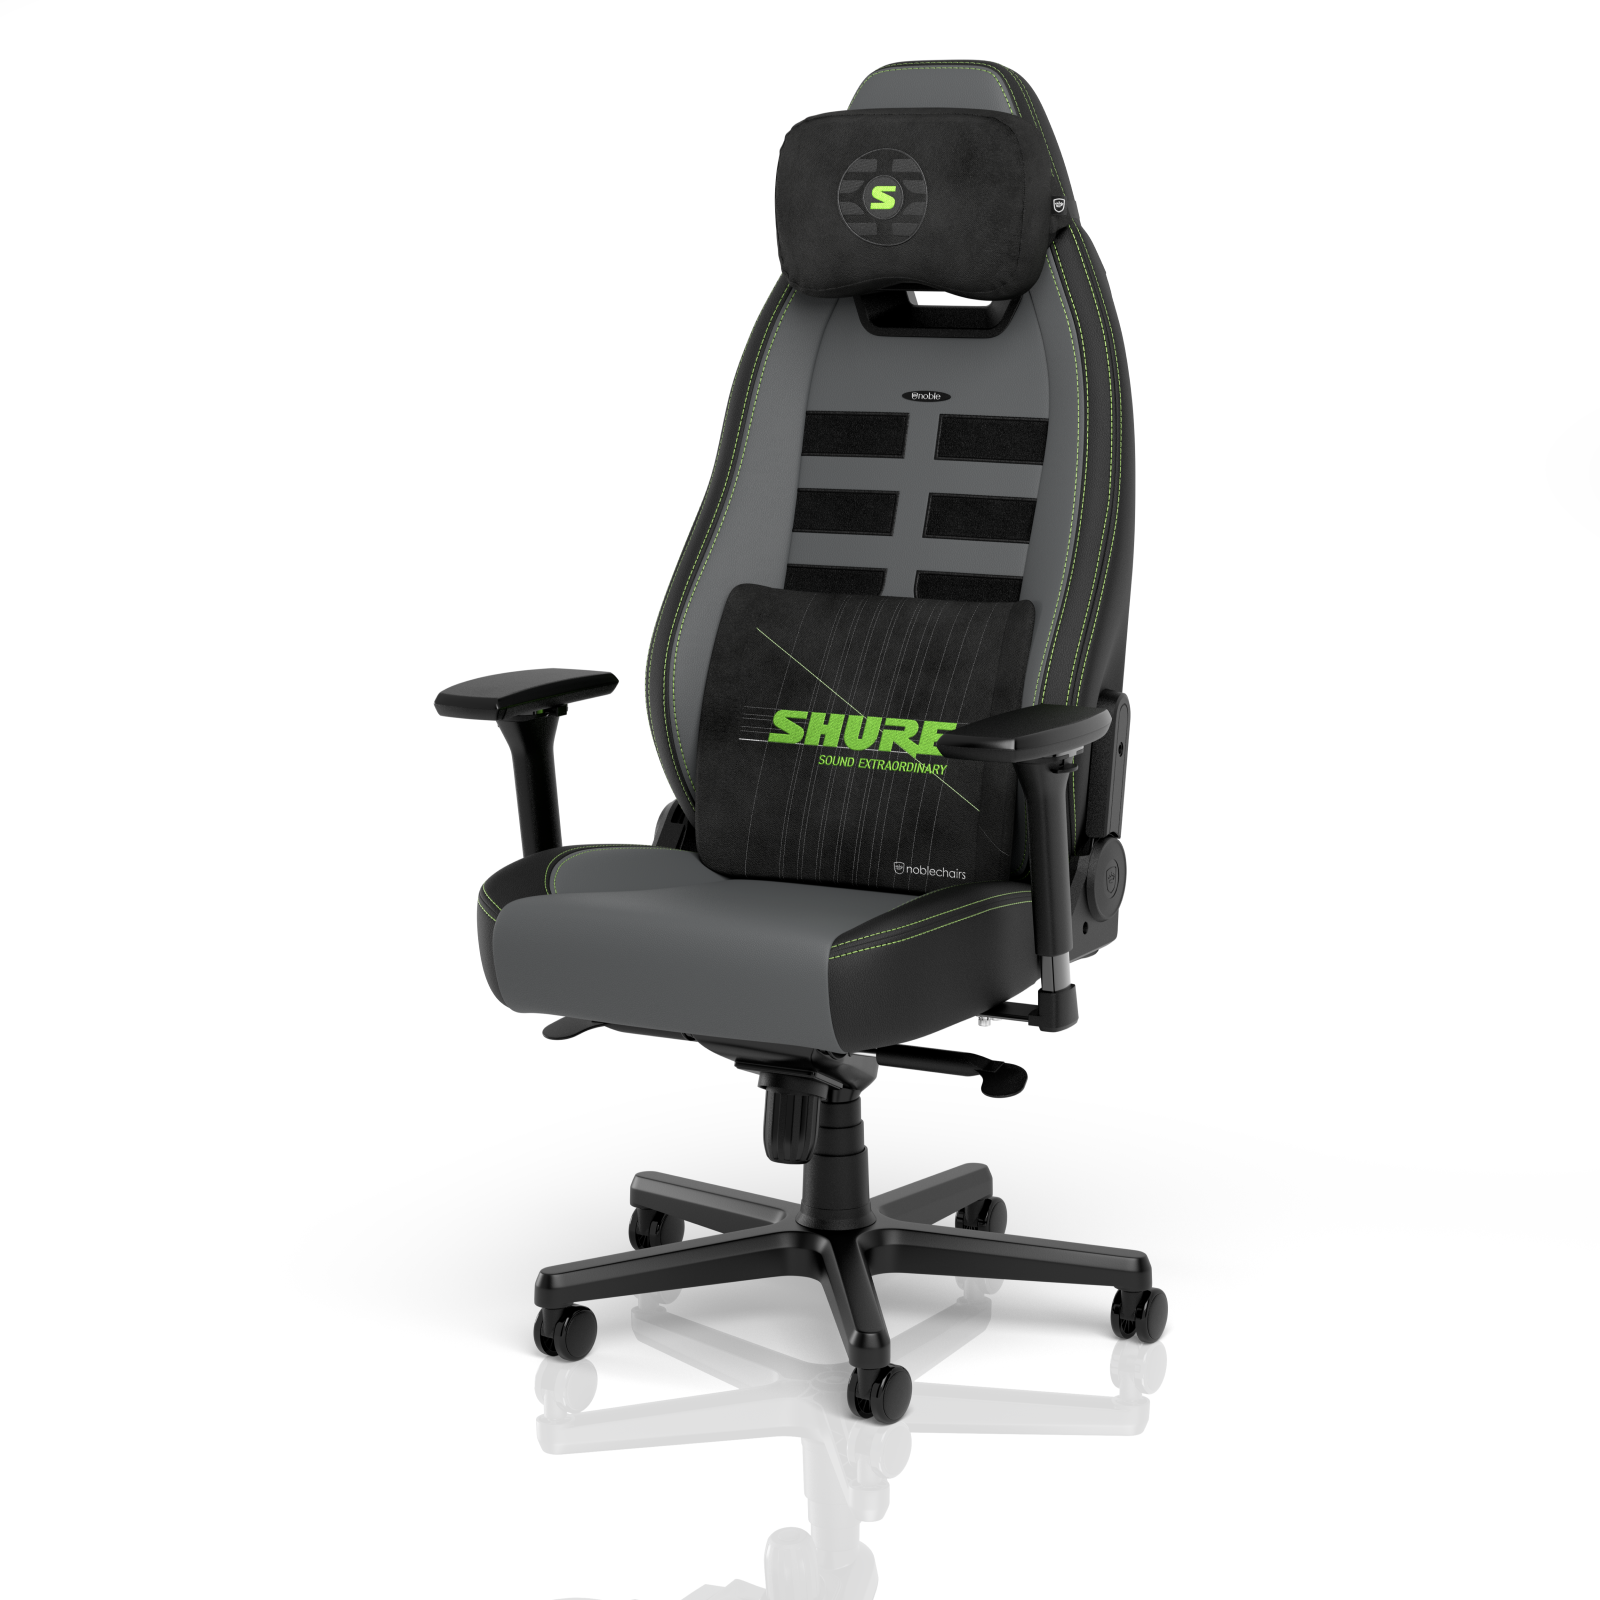 noblechairs LEGEND Shure Edition with matching Pillow Set